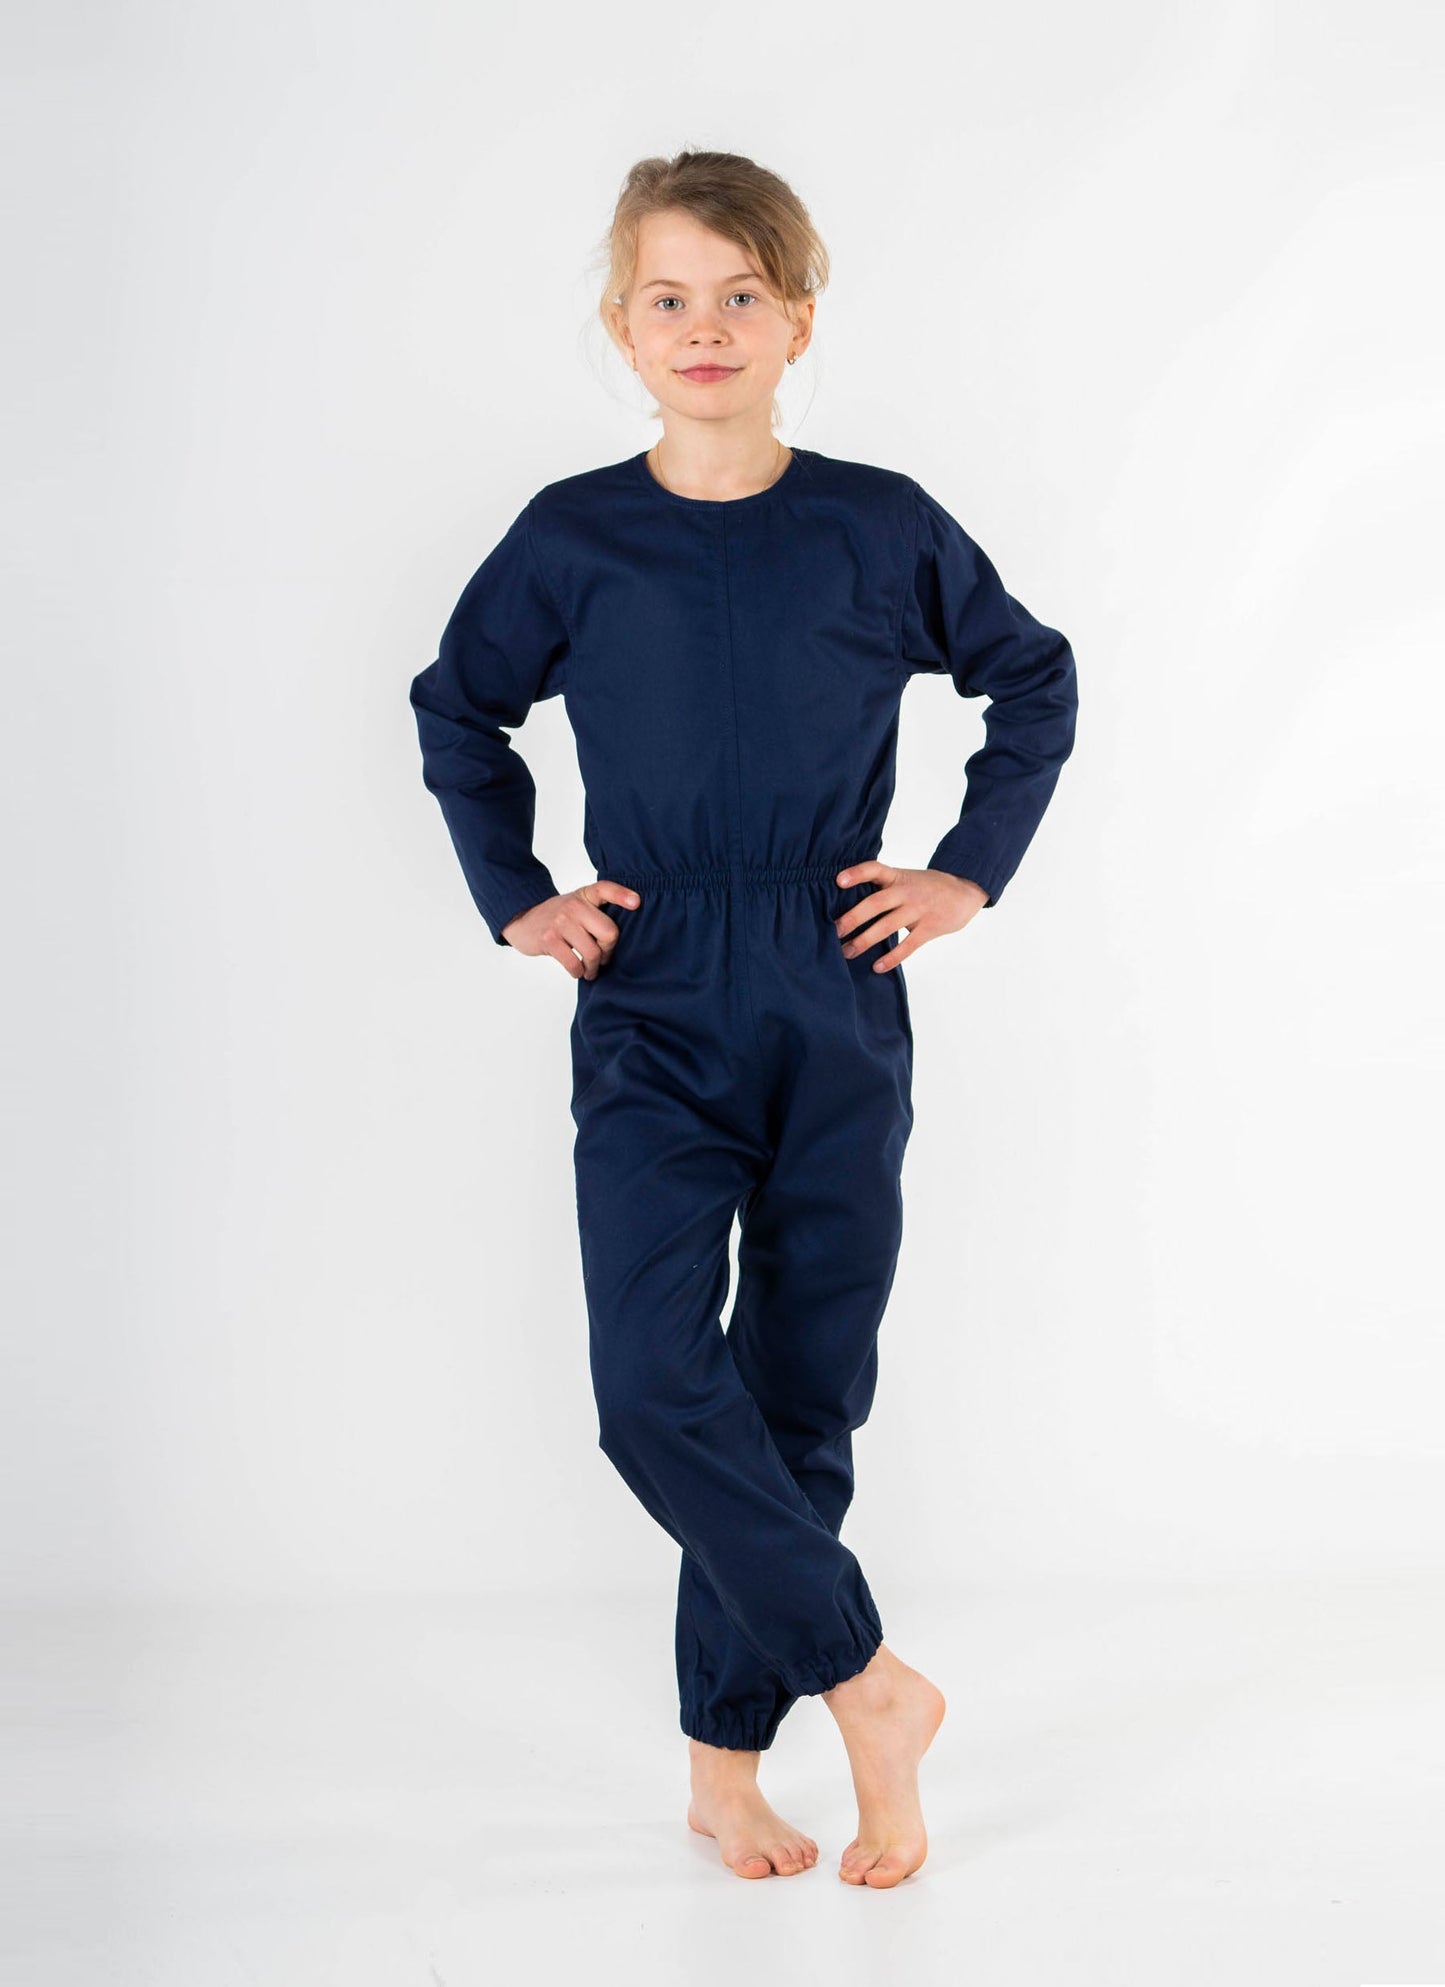 Children's High Durability/Rip resistant Bodysuit With Zip Up The Back-Ring Close (4022)